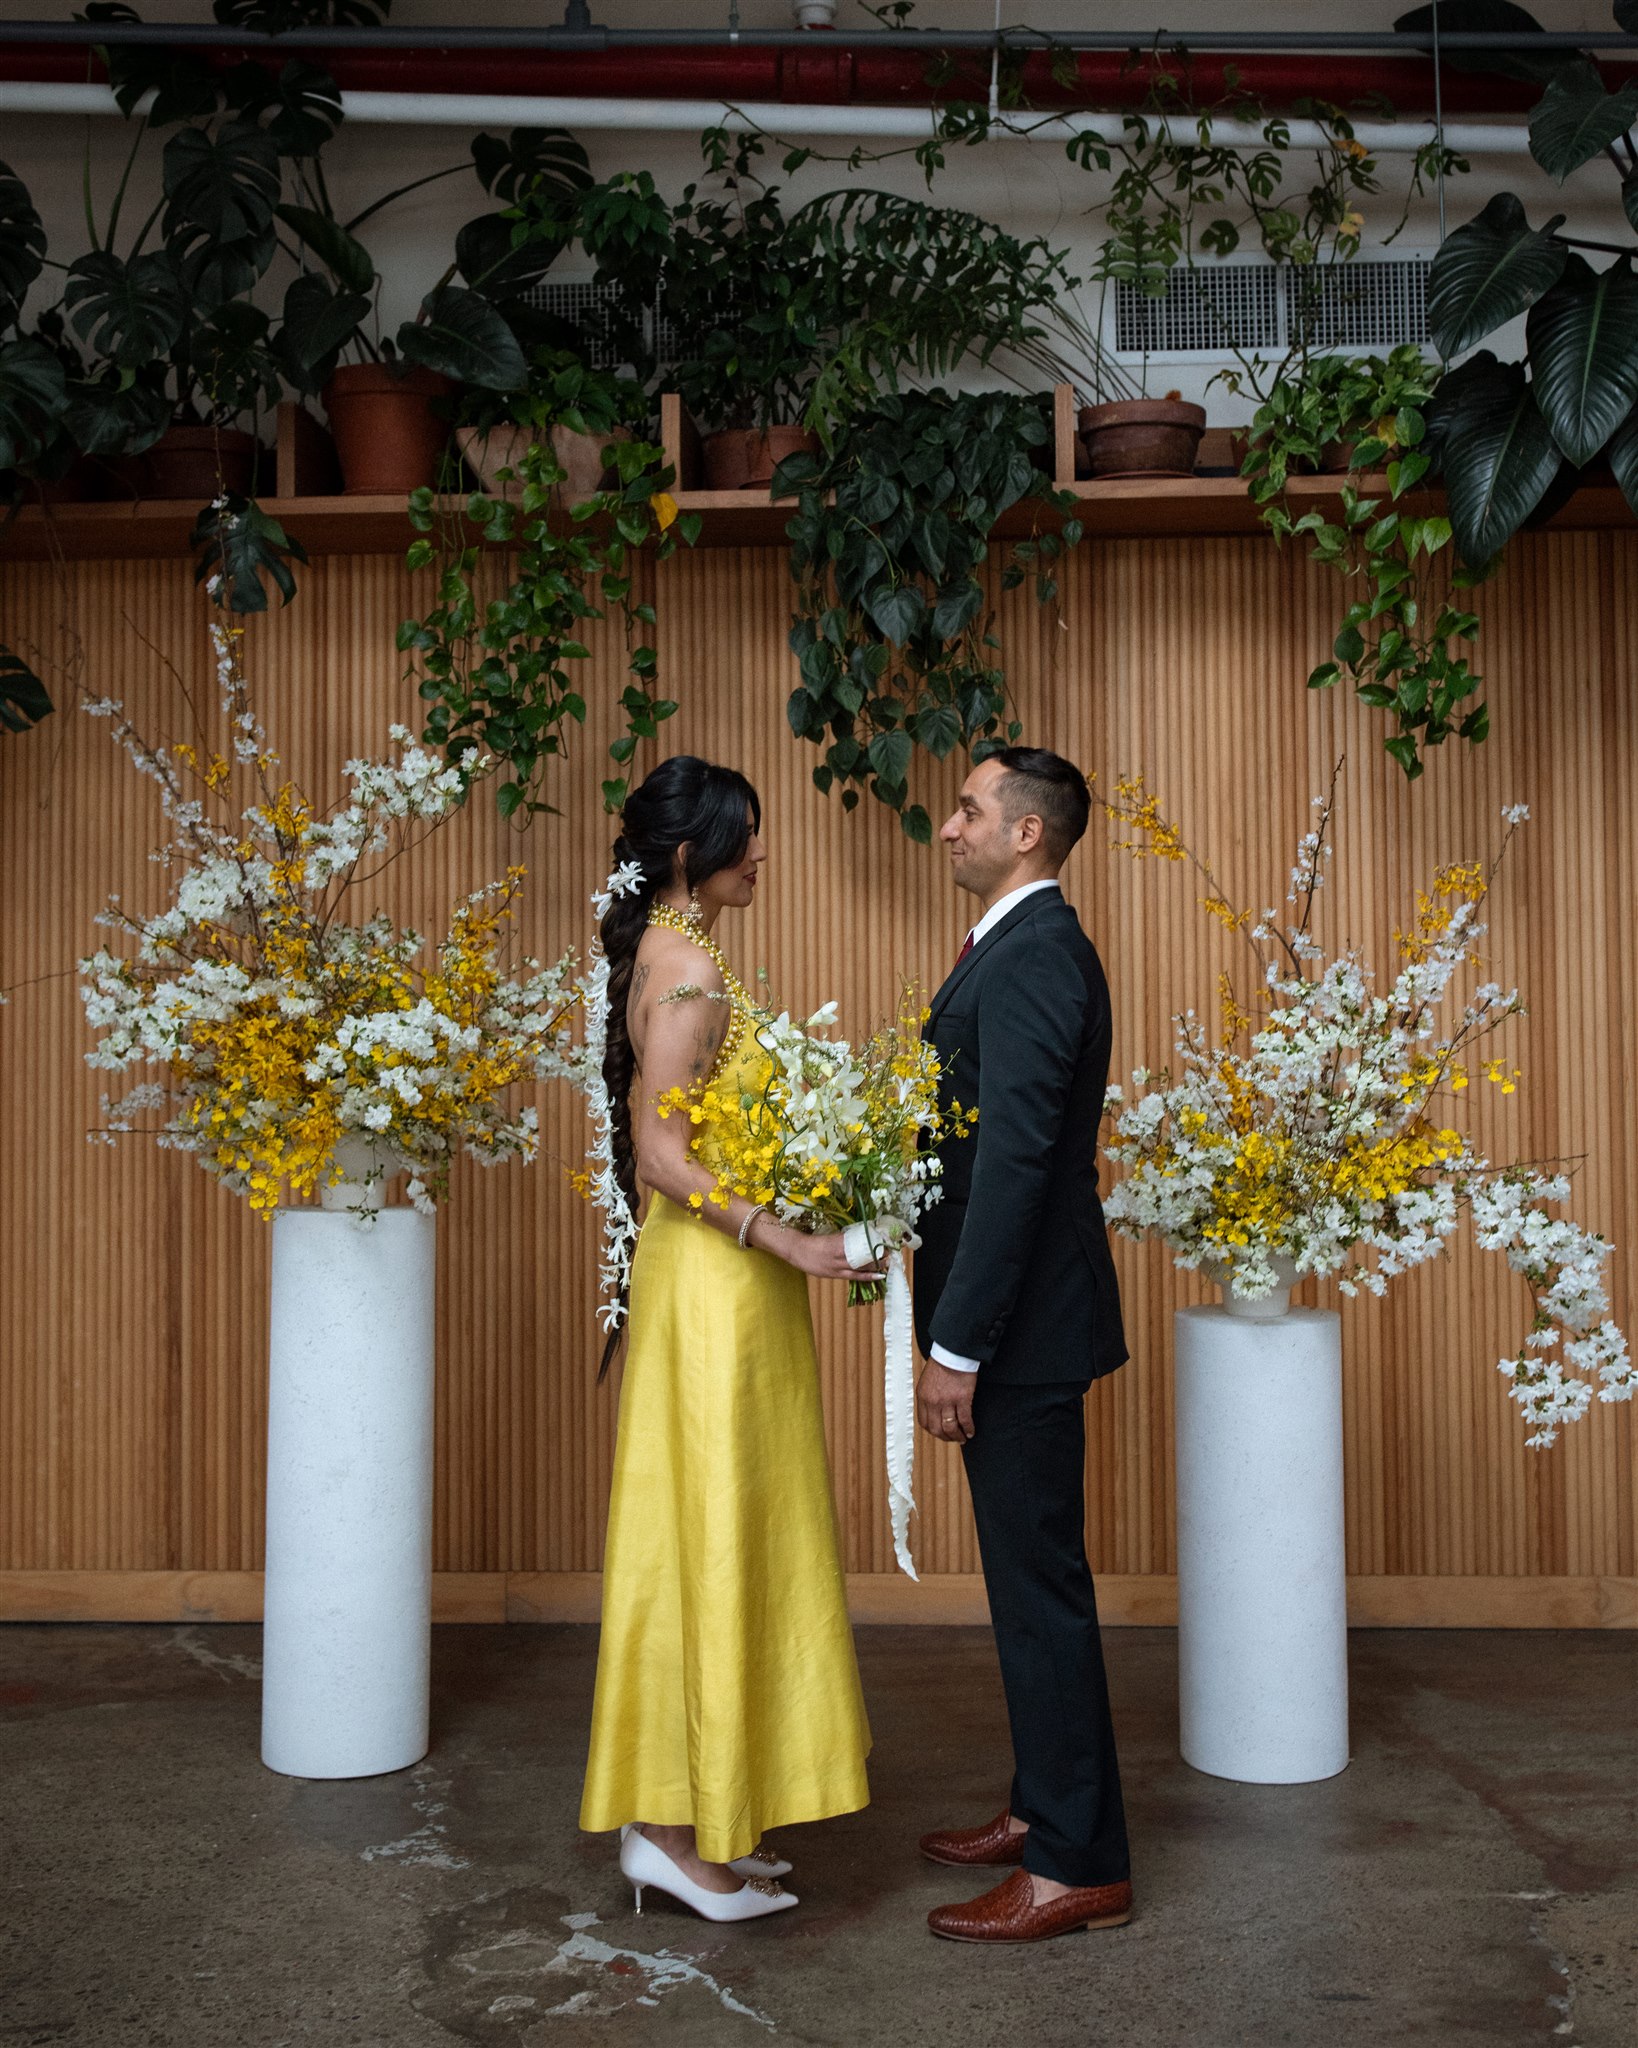 Artful, hip earth-tone wedding inspiration at Office Party in Los Angeles